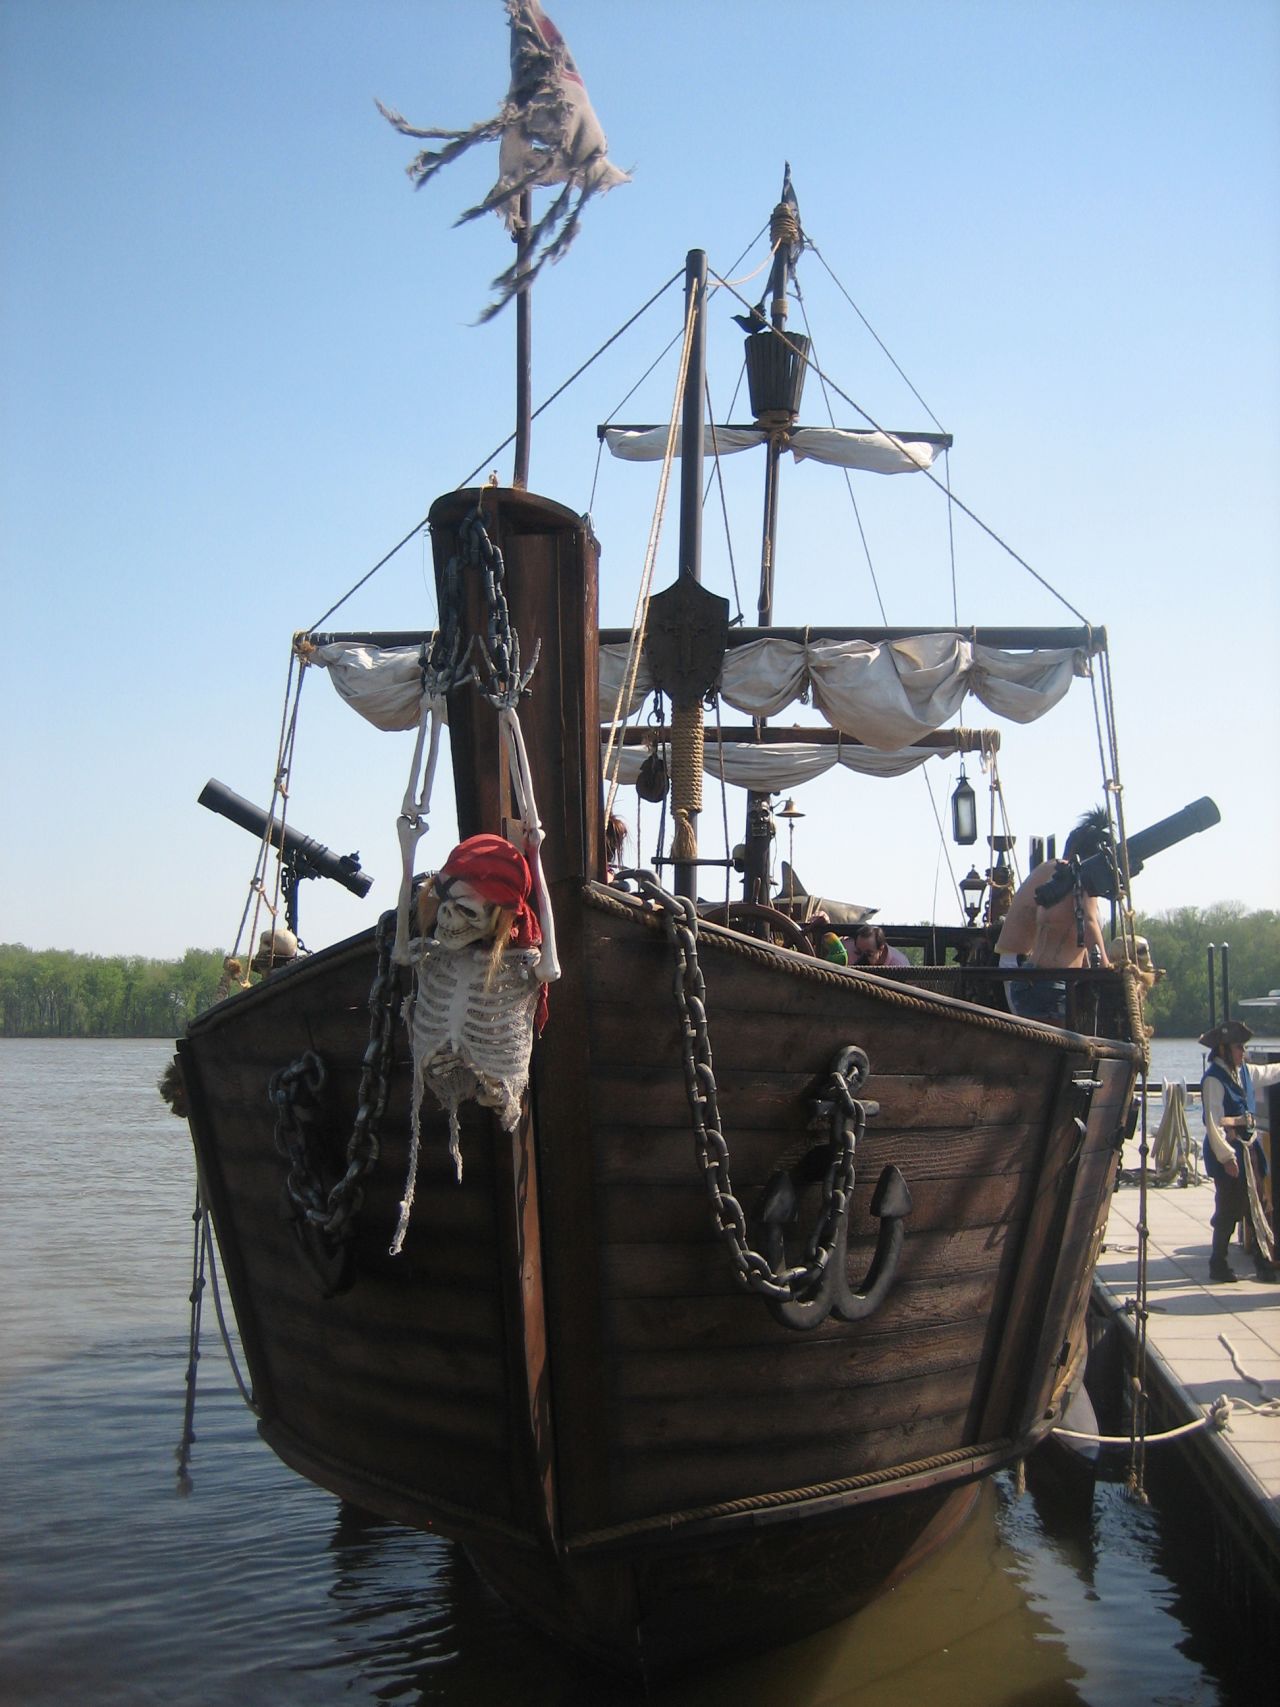 The remarkable vessel could be found cruising along the Mississippi River, which is perhaps better known for it's paddle steamers than pirate ships.